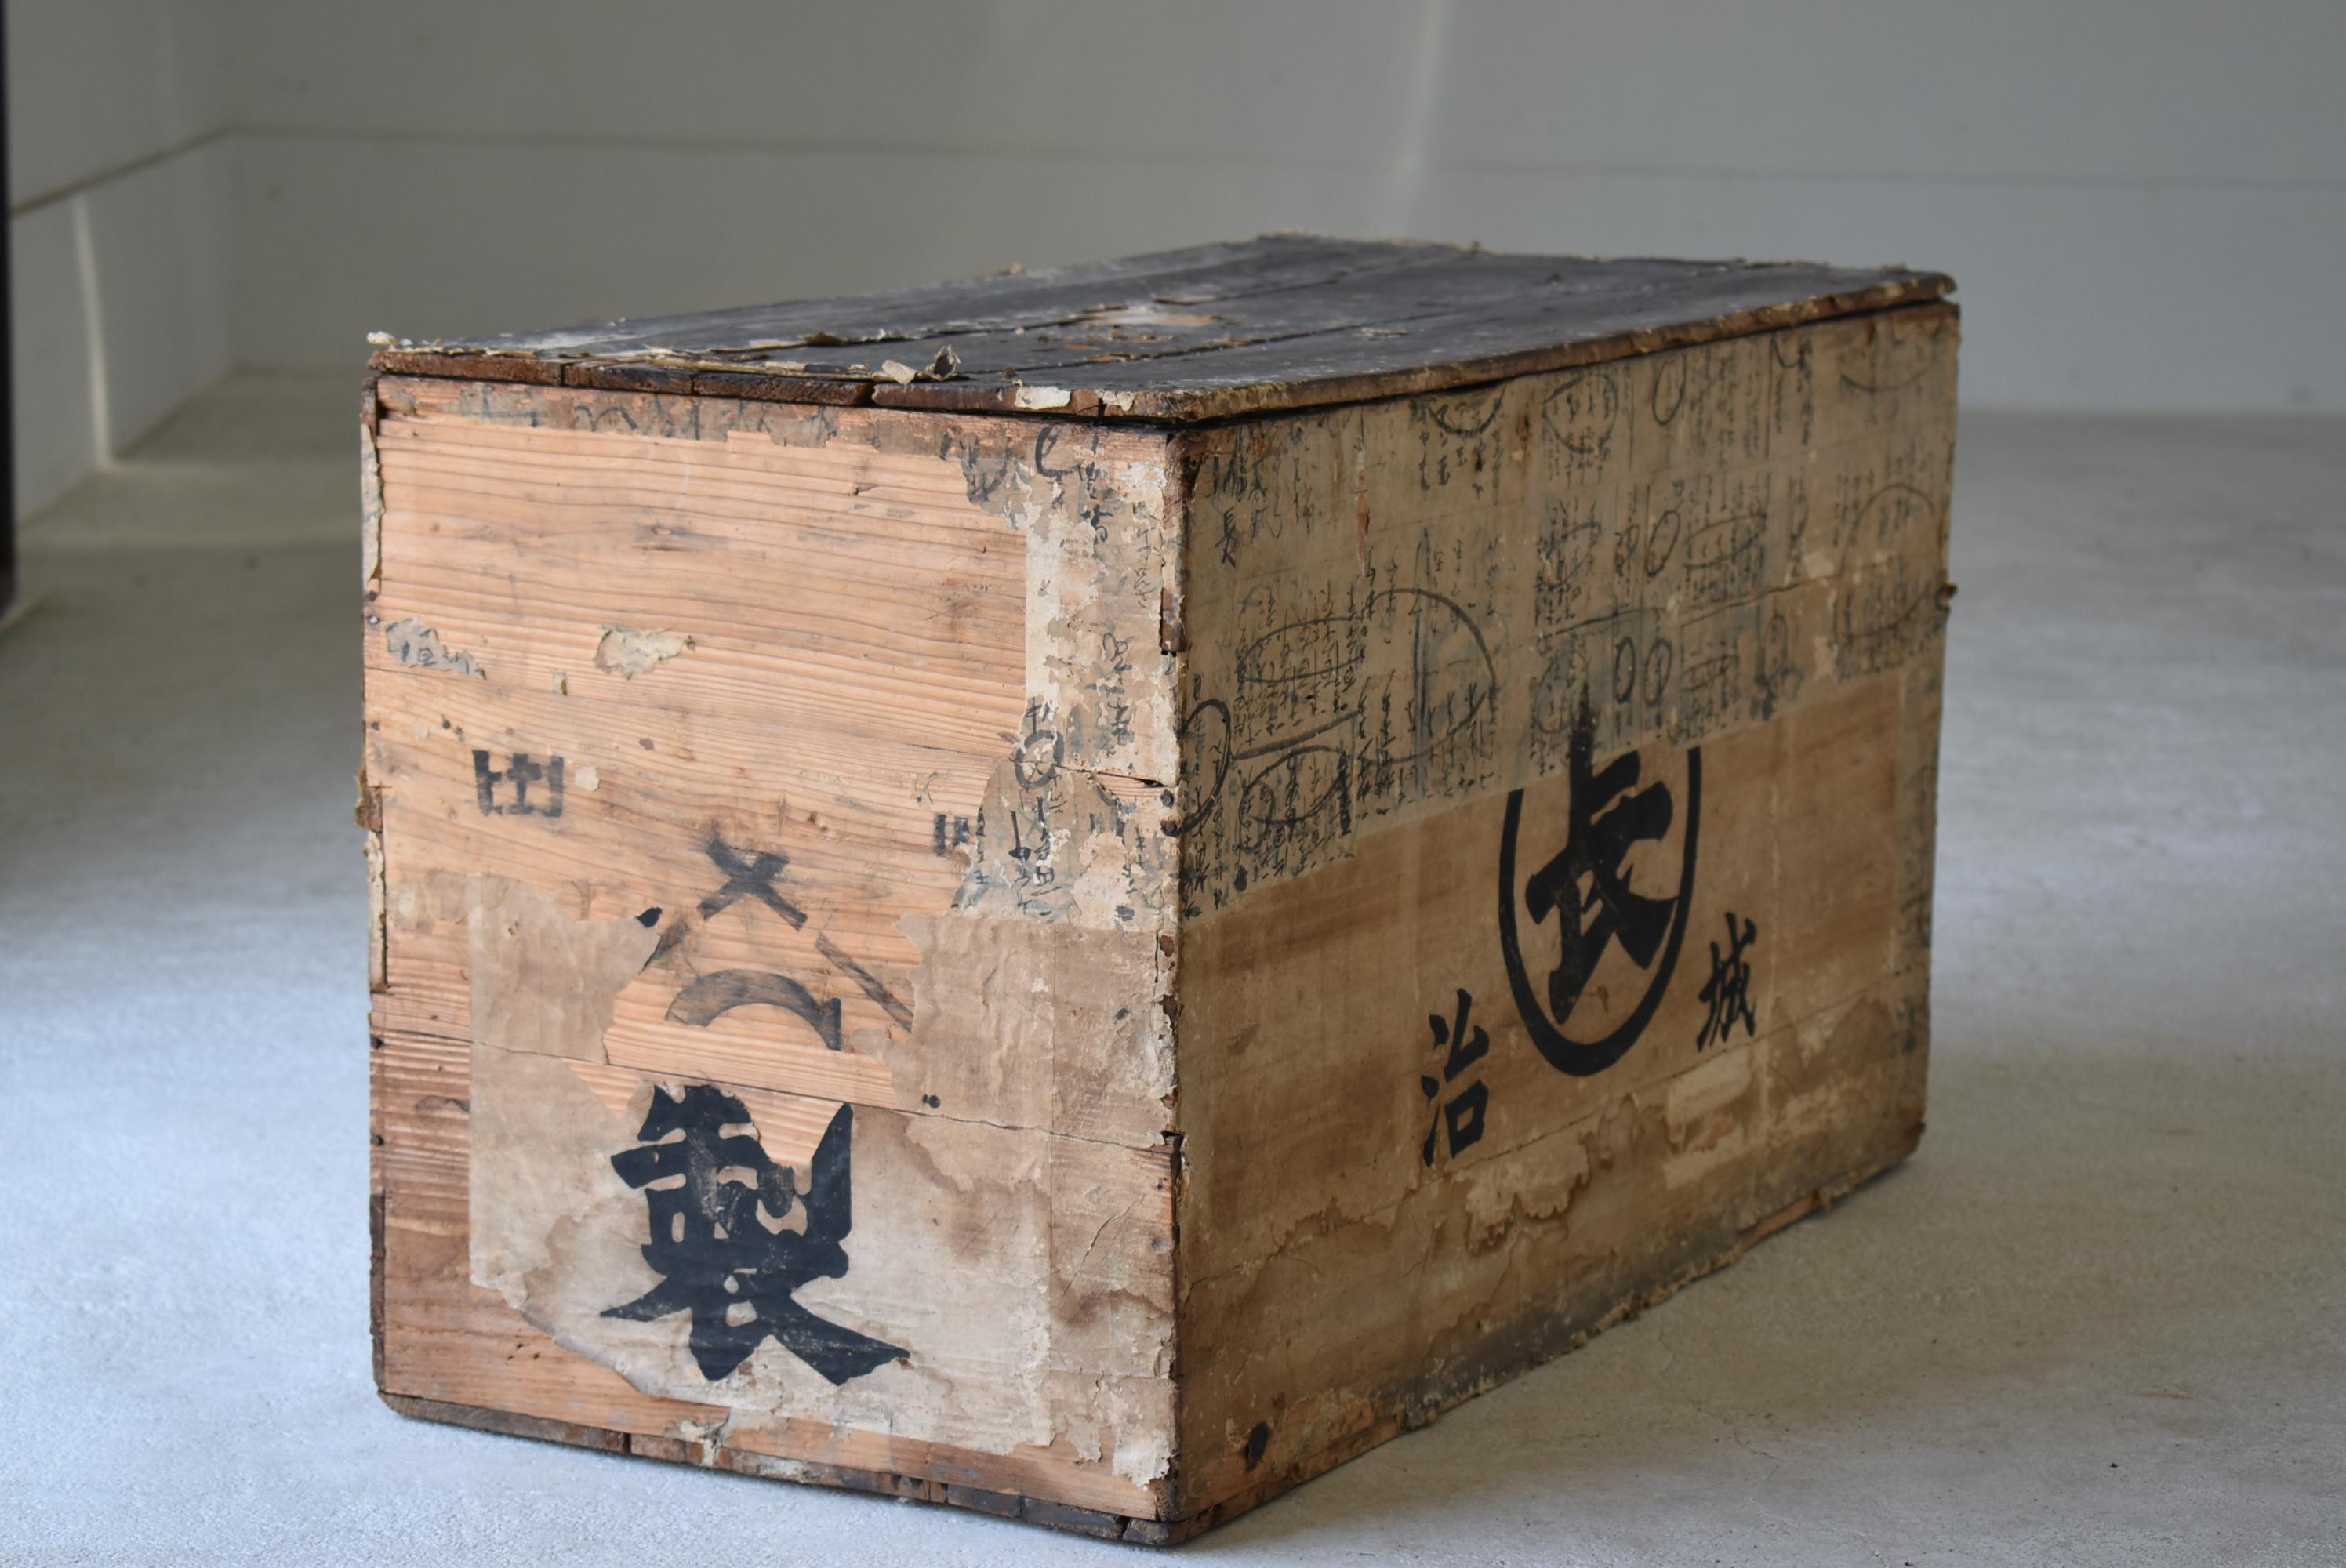 Japanese Old Wooden Box 1860s-1920s/Antique Storage Sideboard Table Wabisabi Art 5